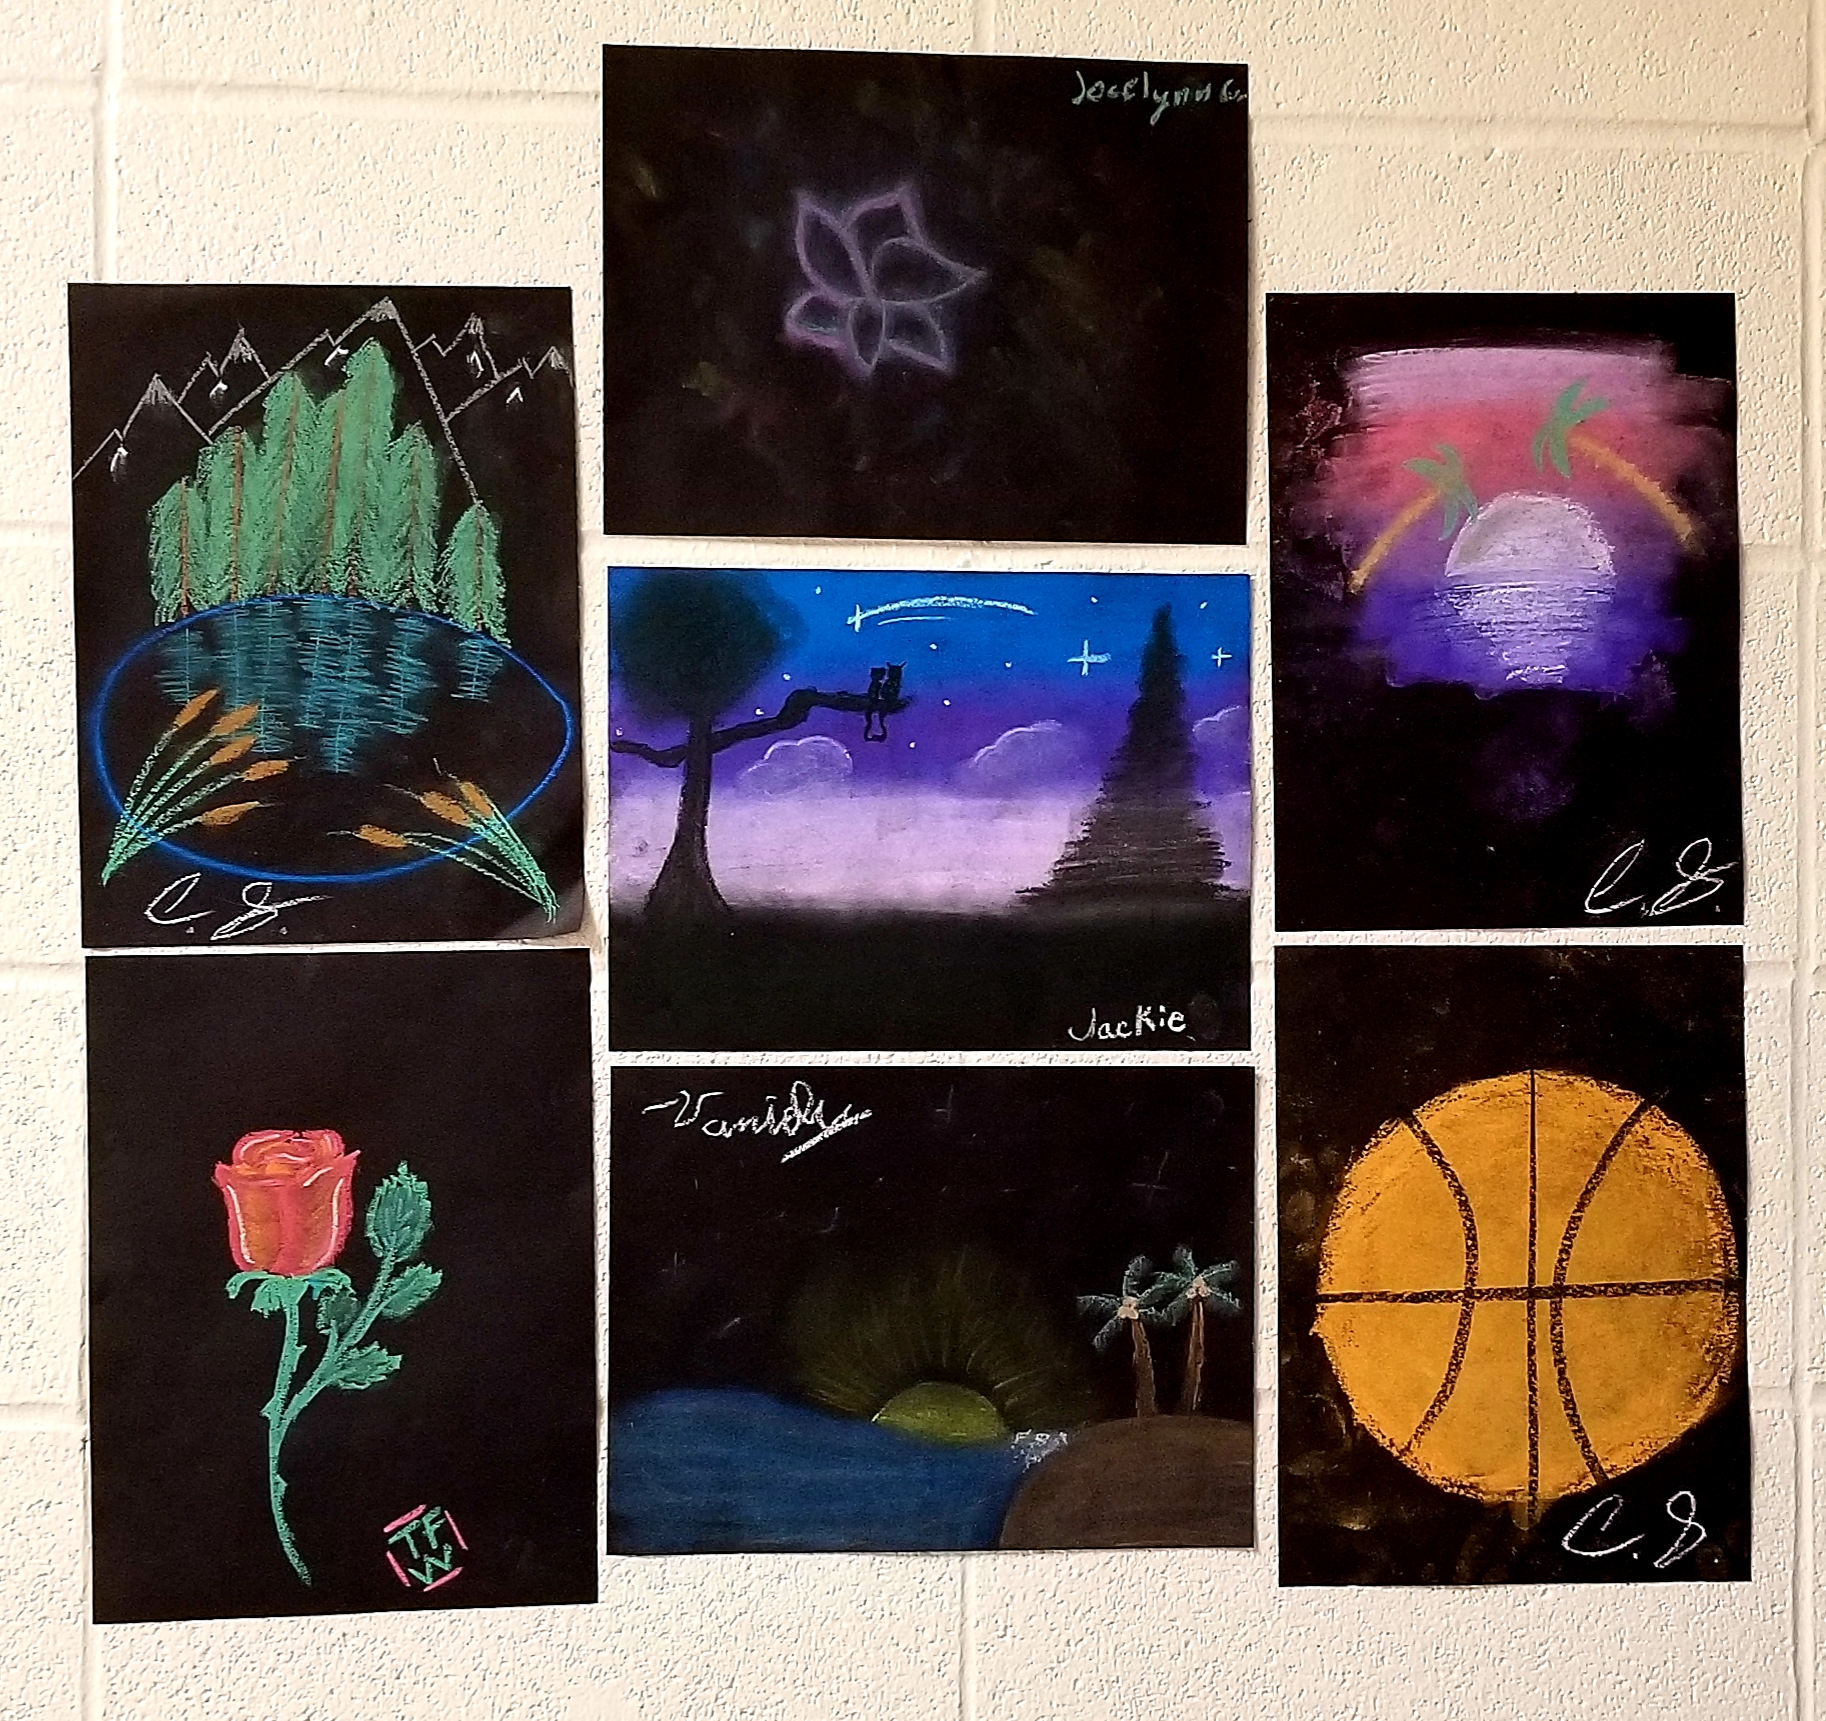 Middle school students art projects in the hallway.